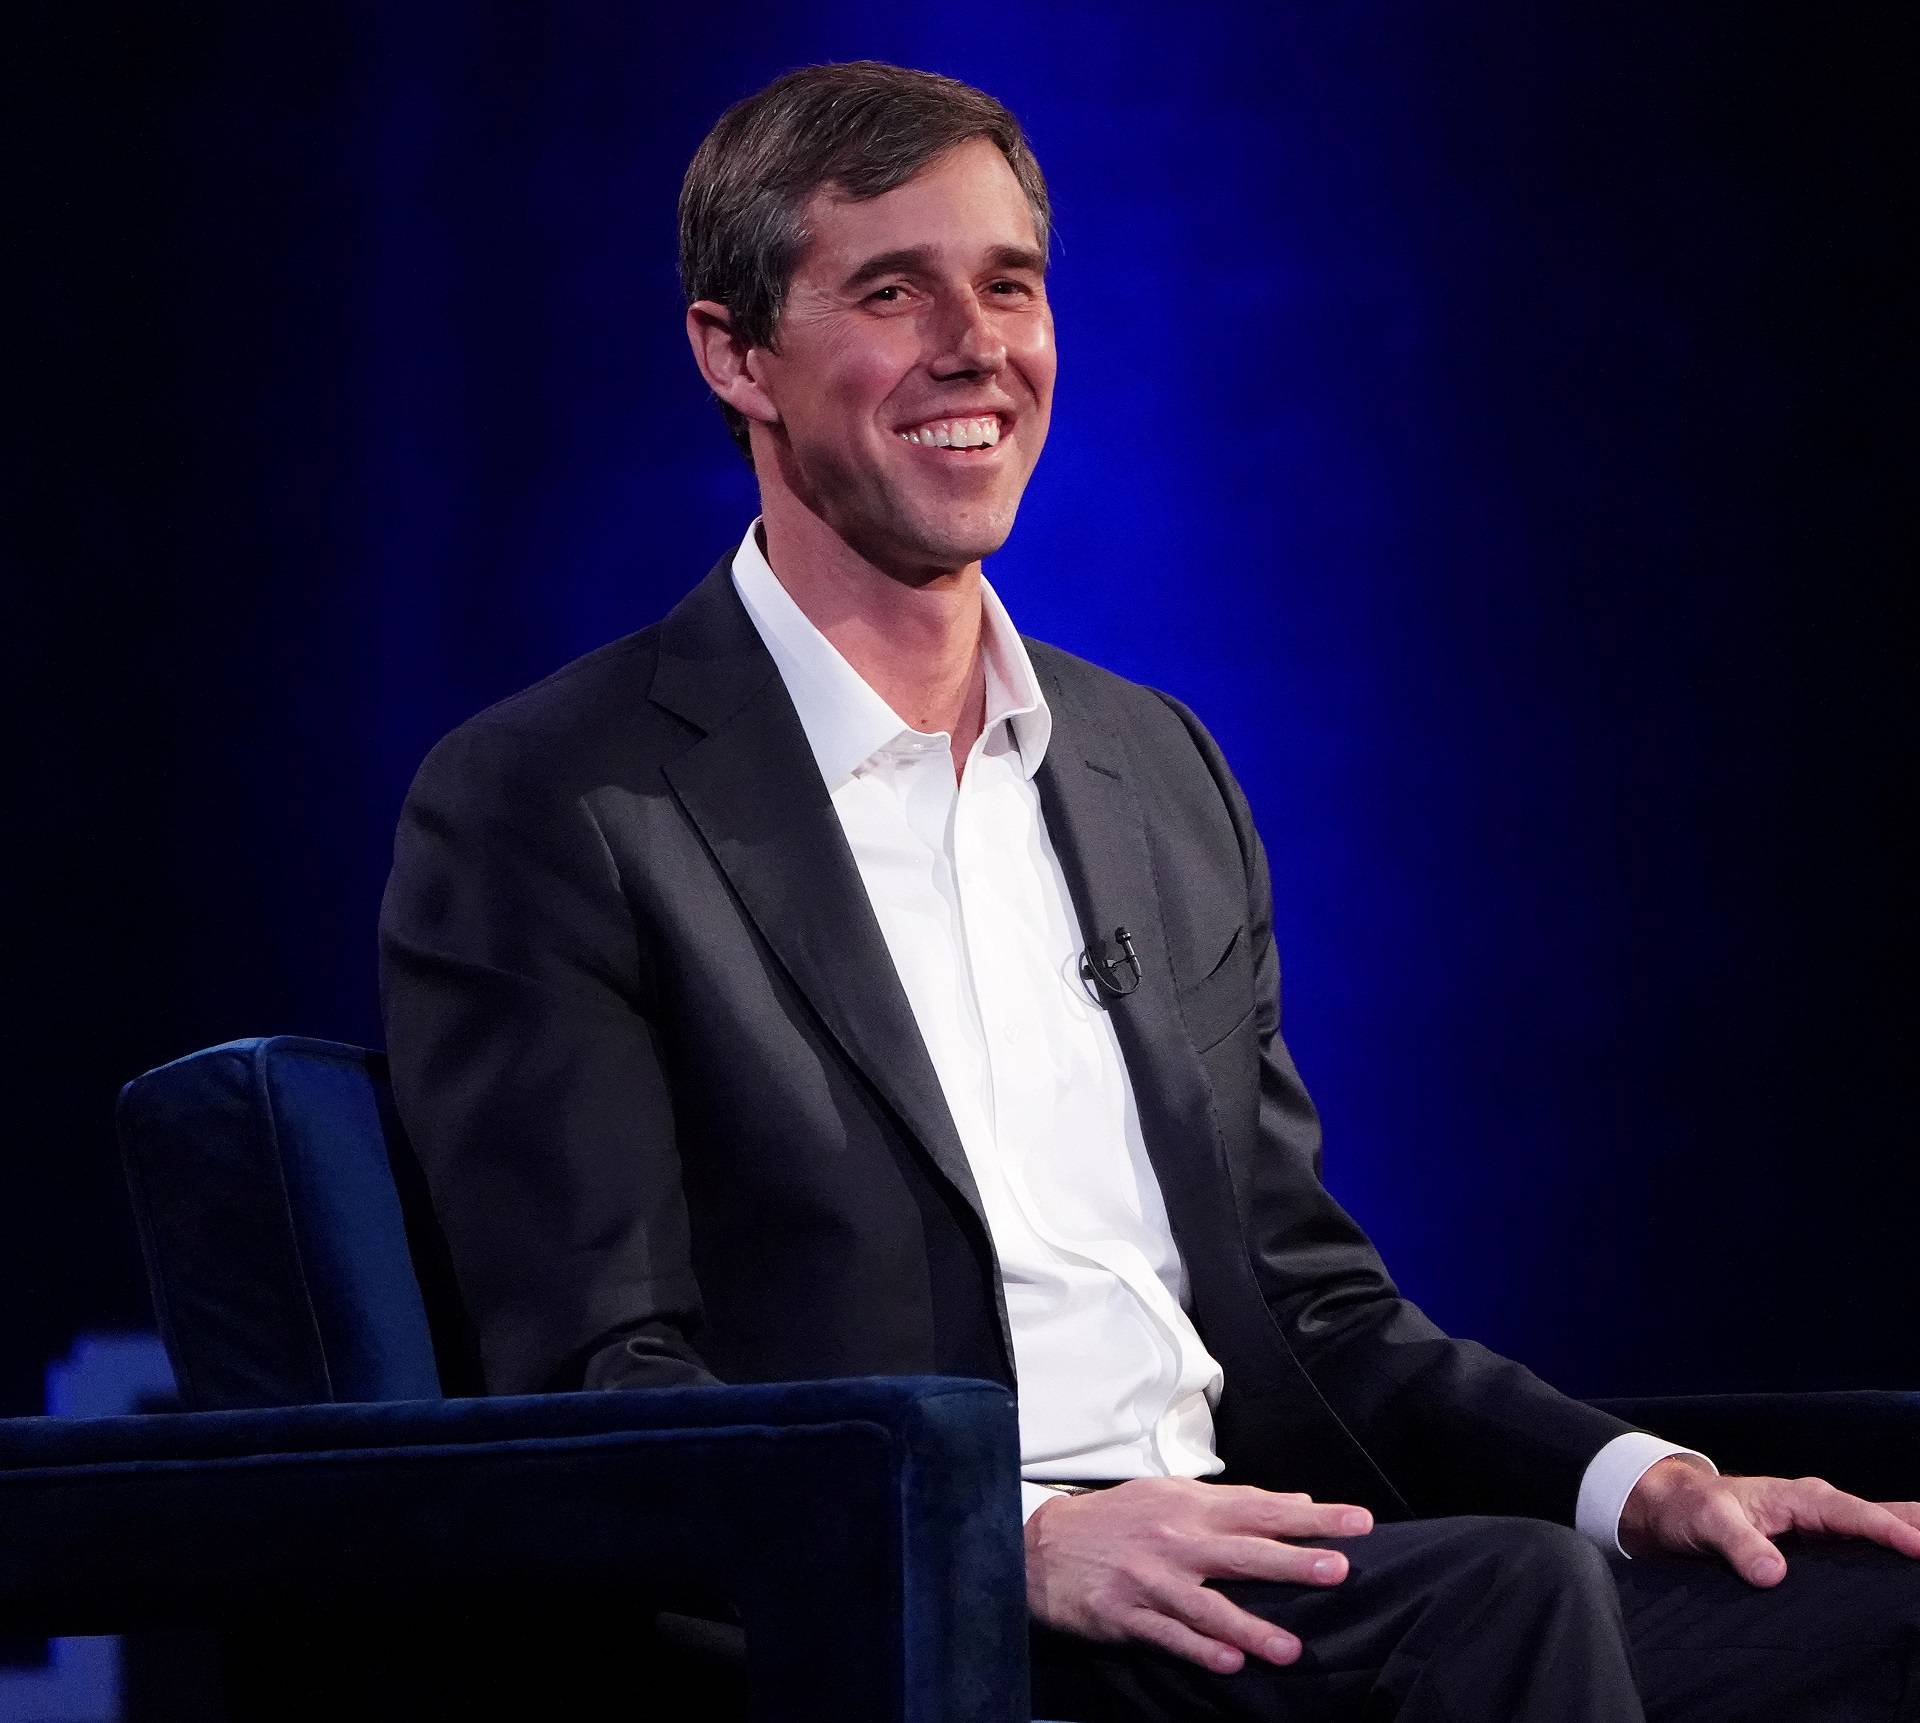 FILE PHOTO: O'Rourke speaks to Winfrey on stage during a taping of her TV show in Manhattan